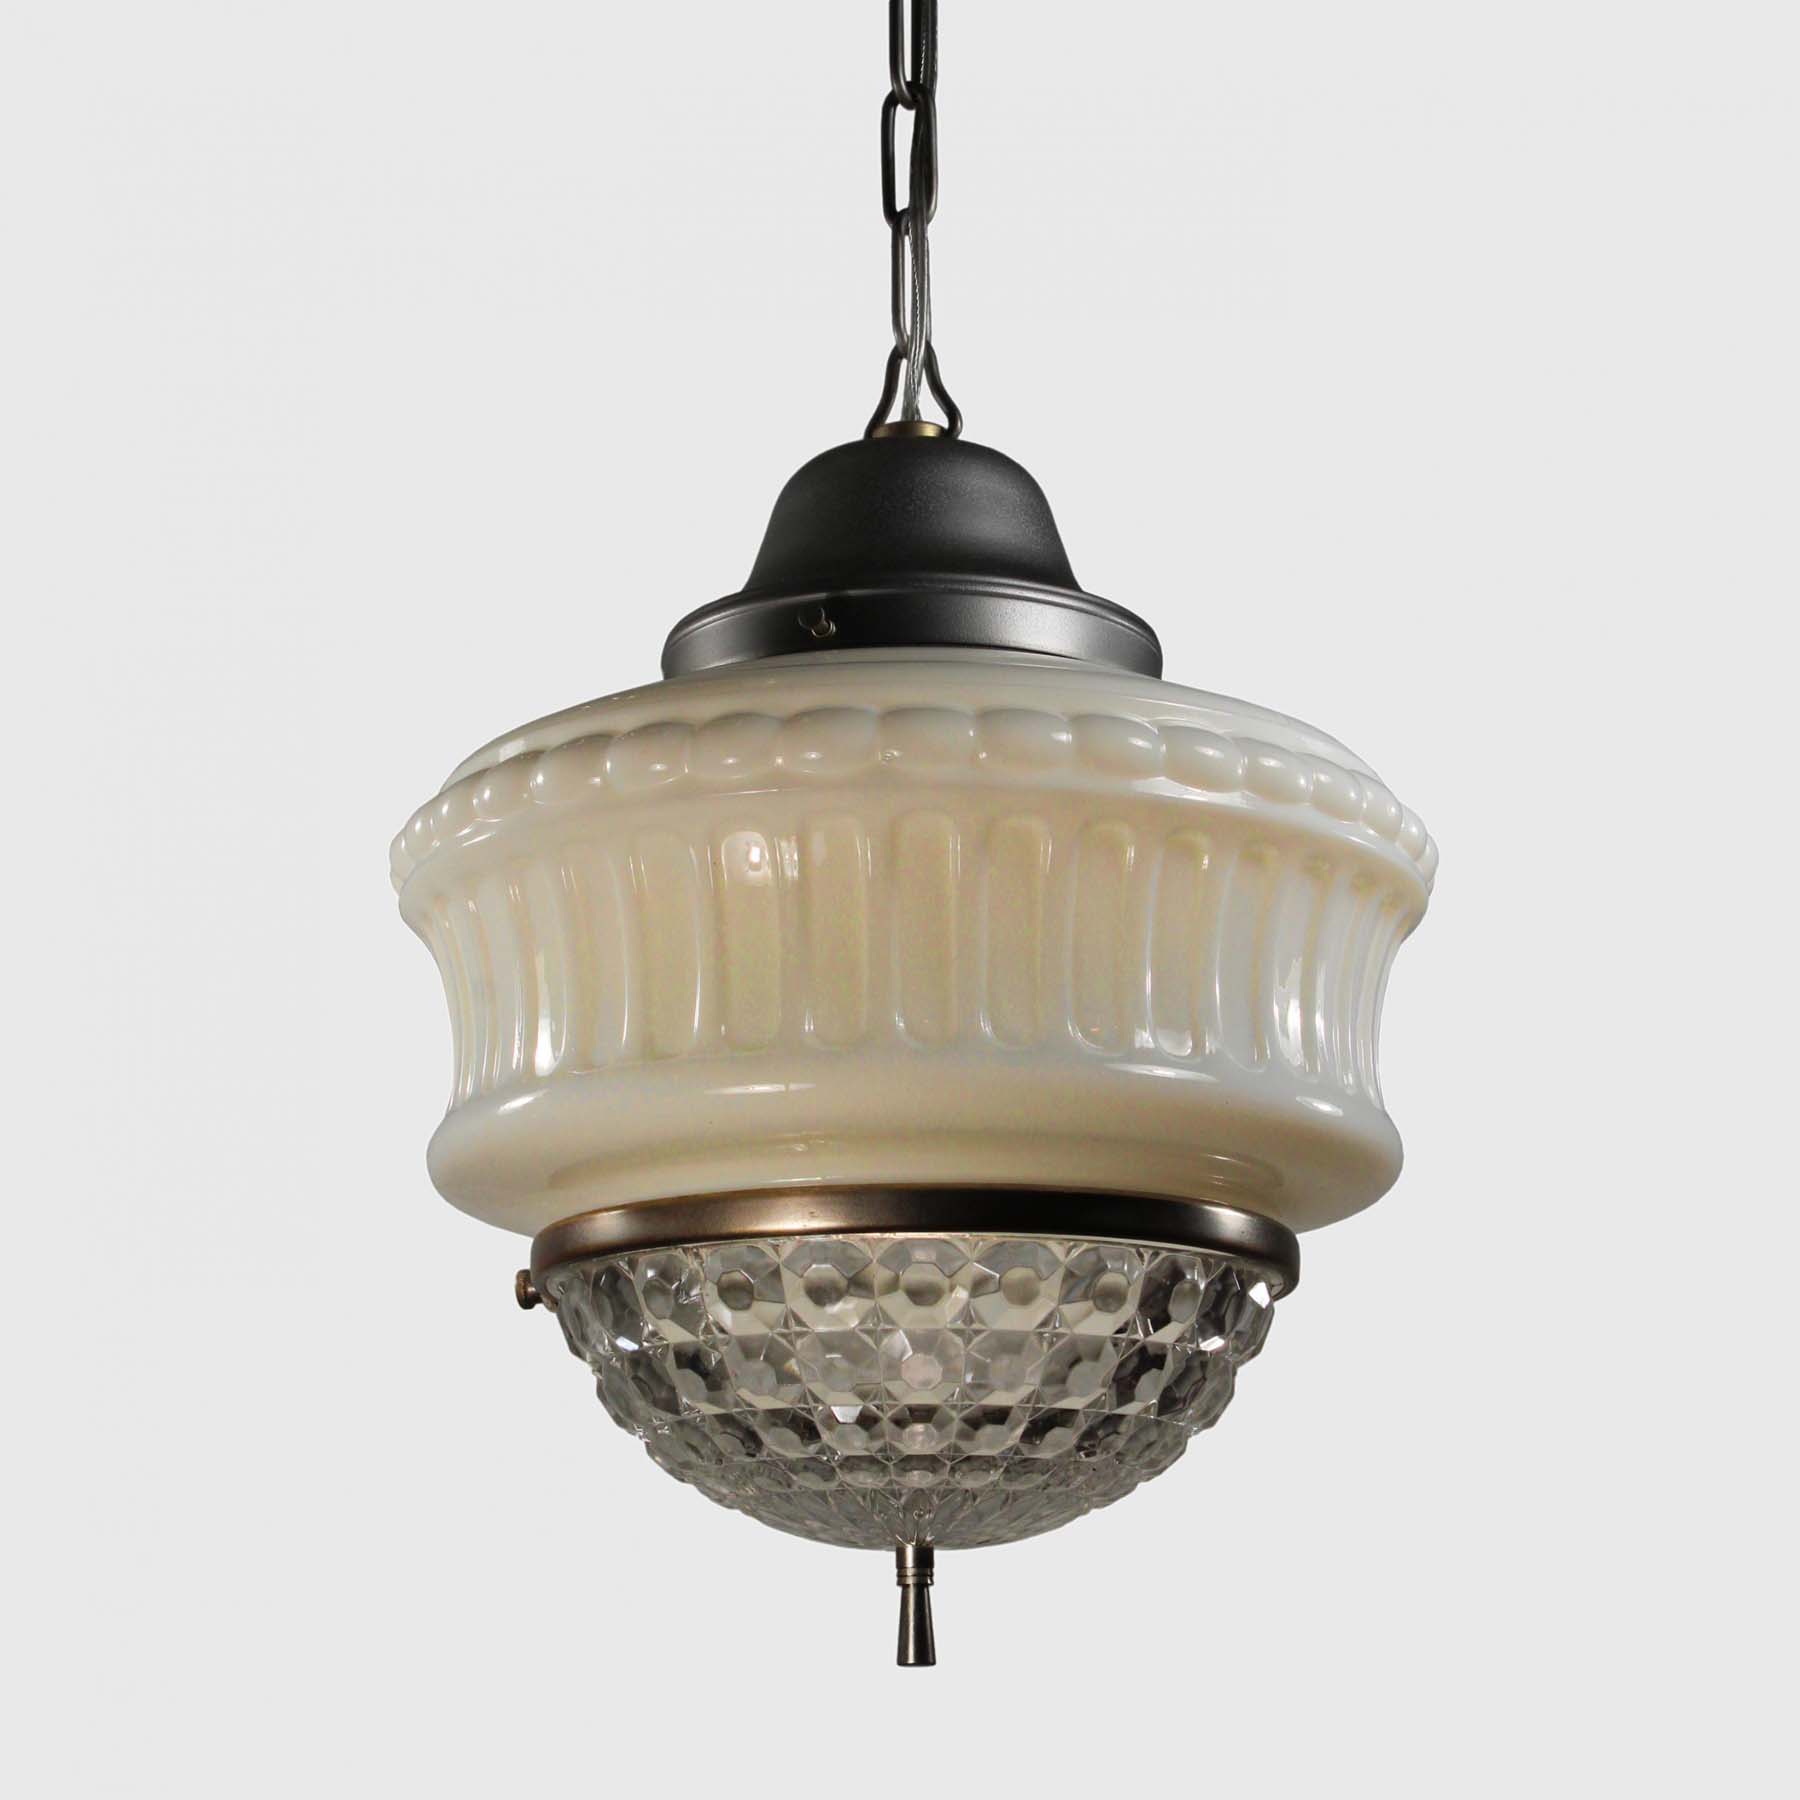 SOLD Unusual Antique Pendant Light with Two-Part Prismatic Shade-68957